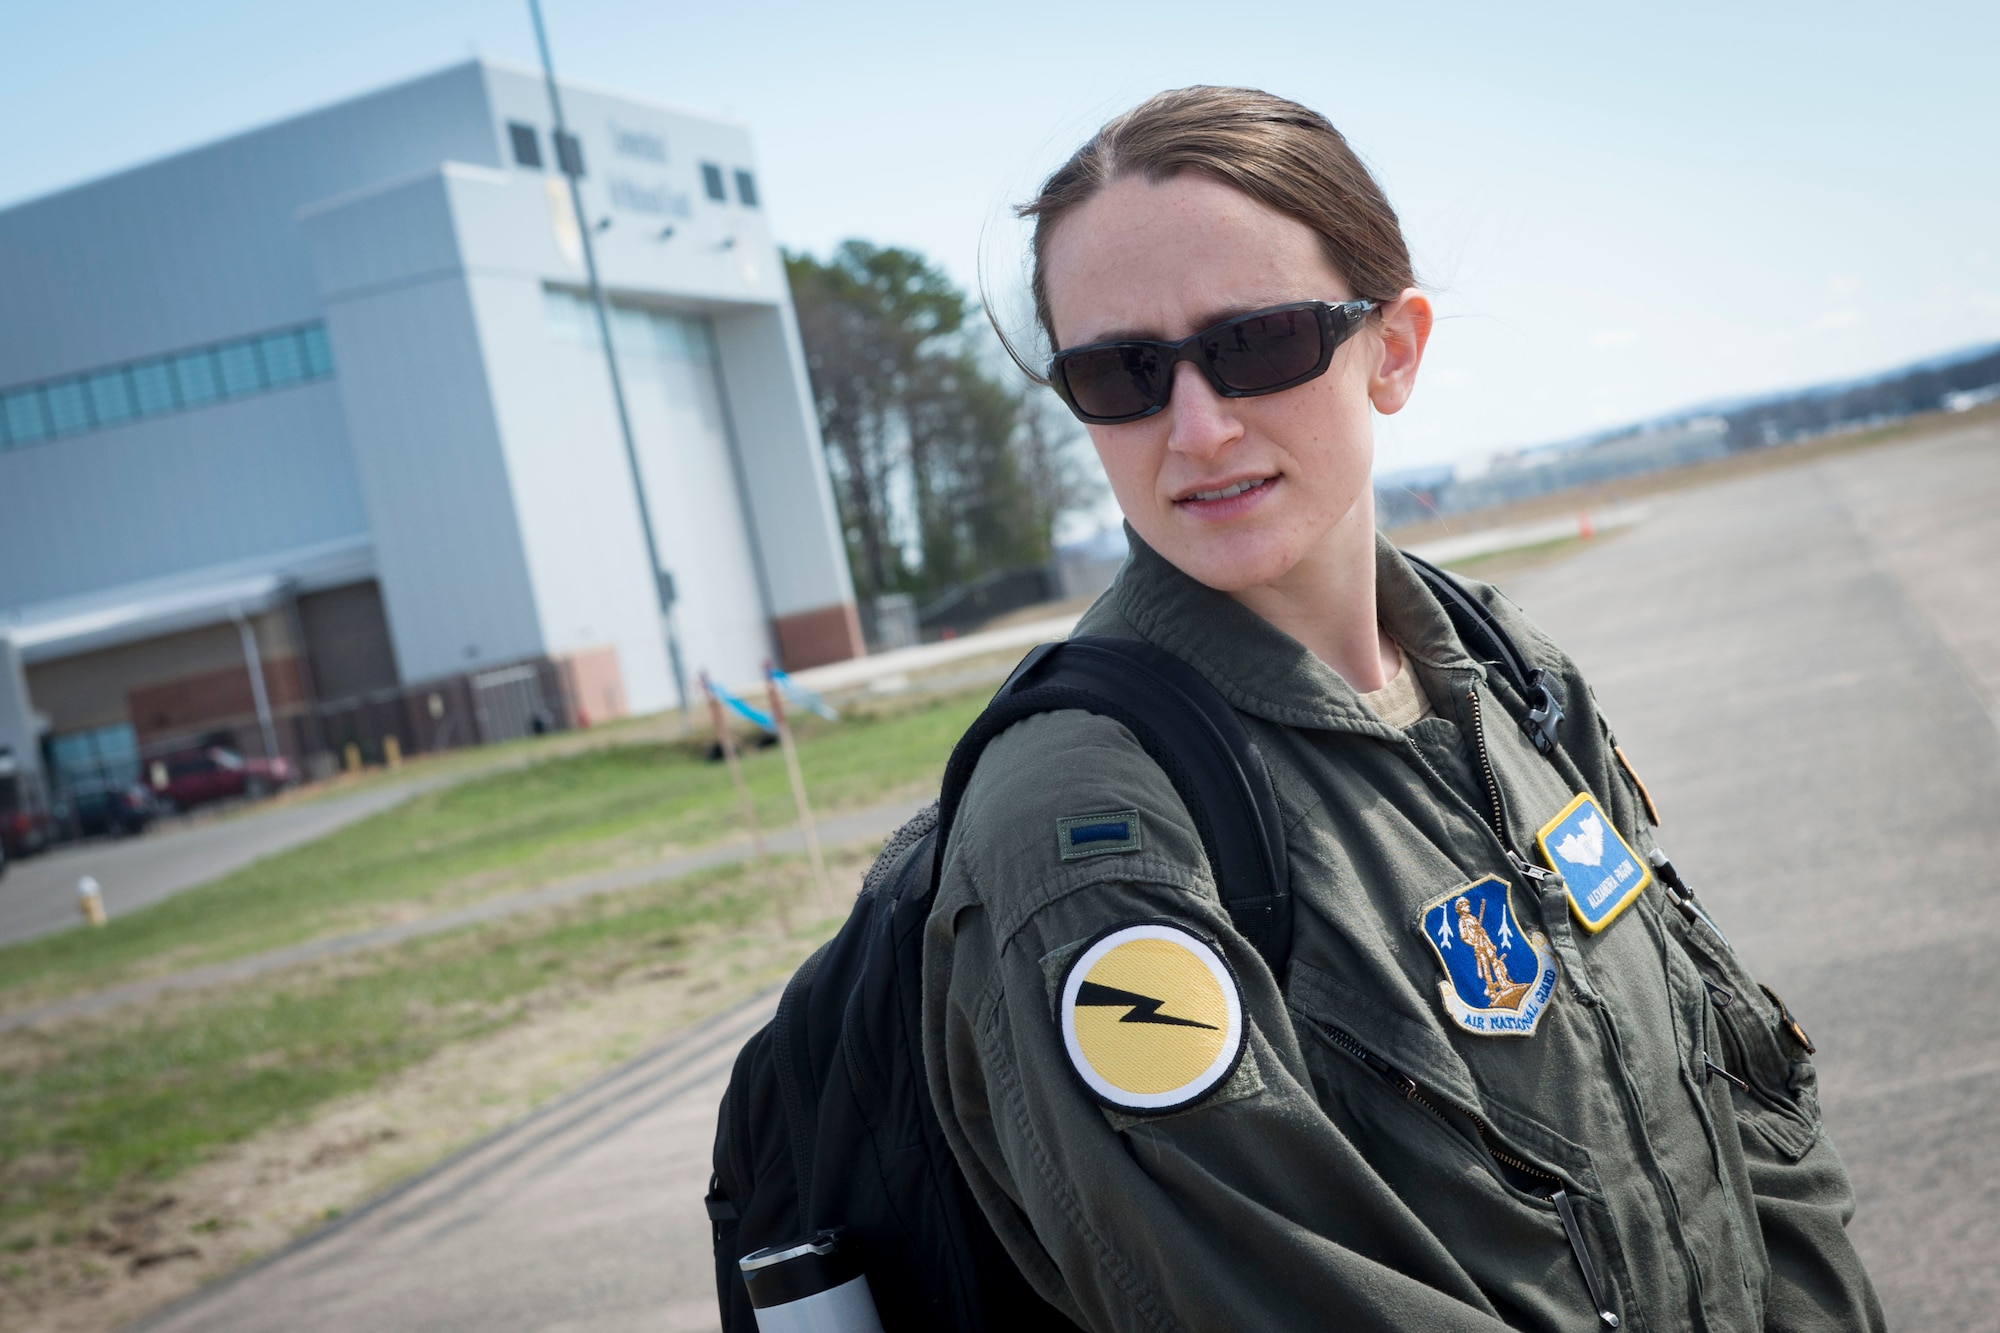 1st Lt. Alexandra Pagoni, a pilot assigned to the 118th Airlift Squadron, participates in a video shoot for a commercial to promote the Air National Guard, April 7, 2021 at Bradley Air National Guard Base, Connecticut. The commercial, part of the ‘Serve Your Way’ campaign, highlights how and why Air National Guard members serve in the Guard. (U.S. Air National Guard photo by Master Sgt. Tamara R. Dabney)